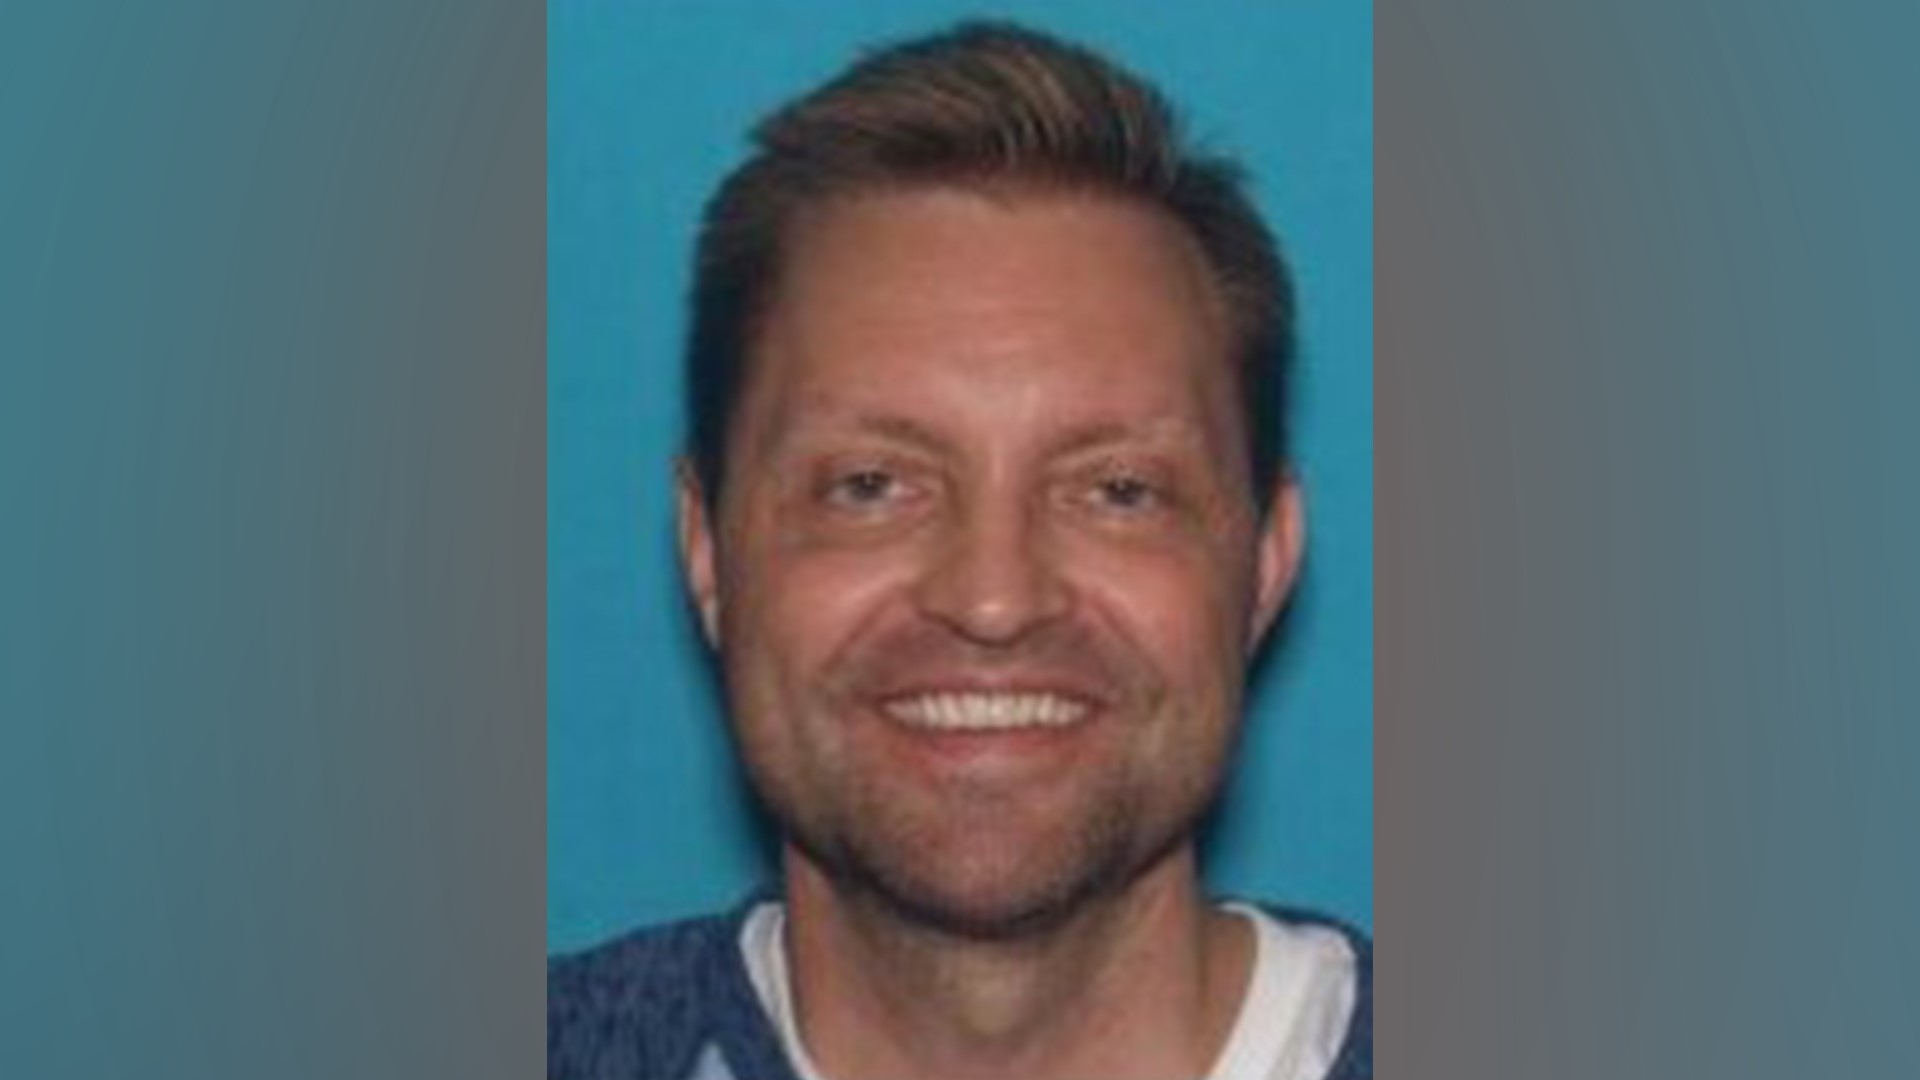 The body of a Missouri emergency room doctor who has been missing was allegedly found in Beaver Lake with "what appears to be a gunshot wound"